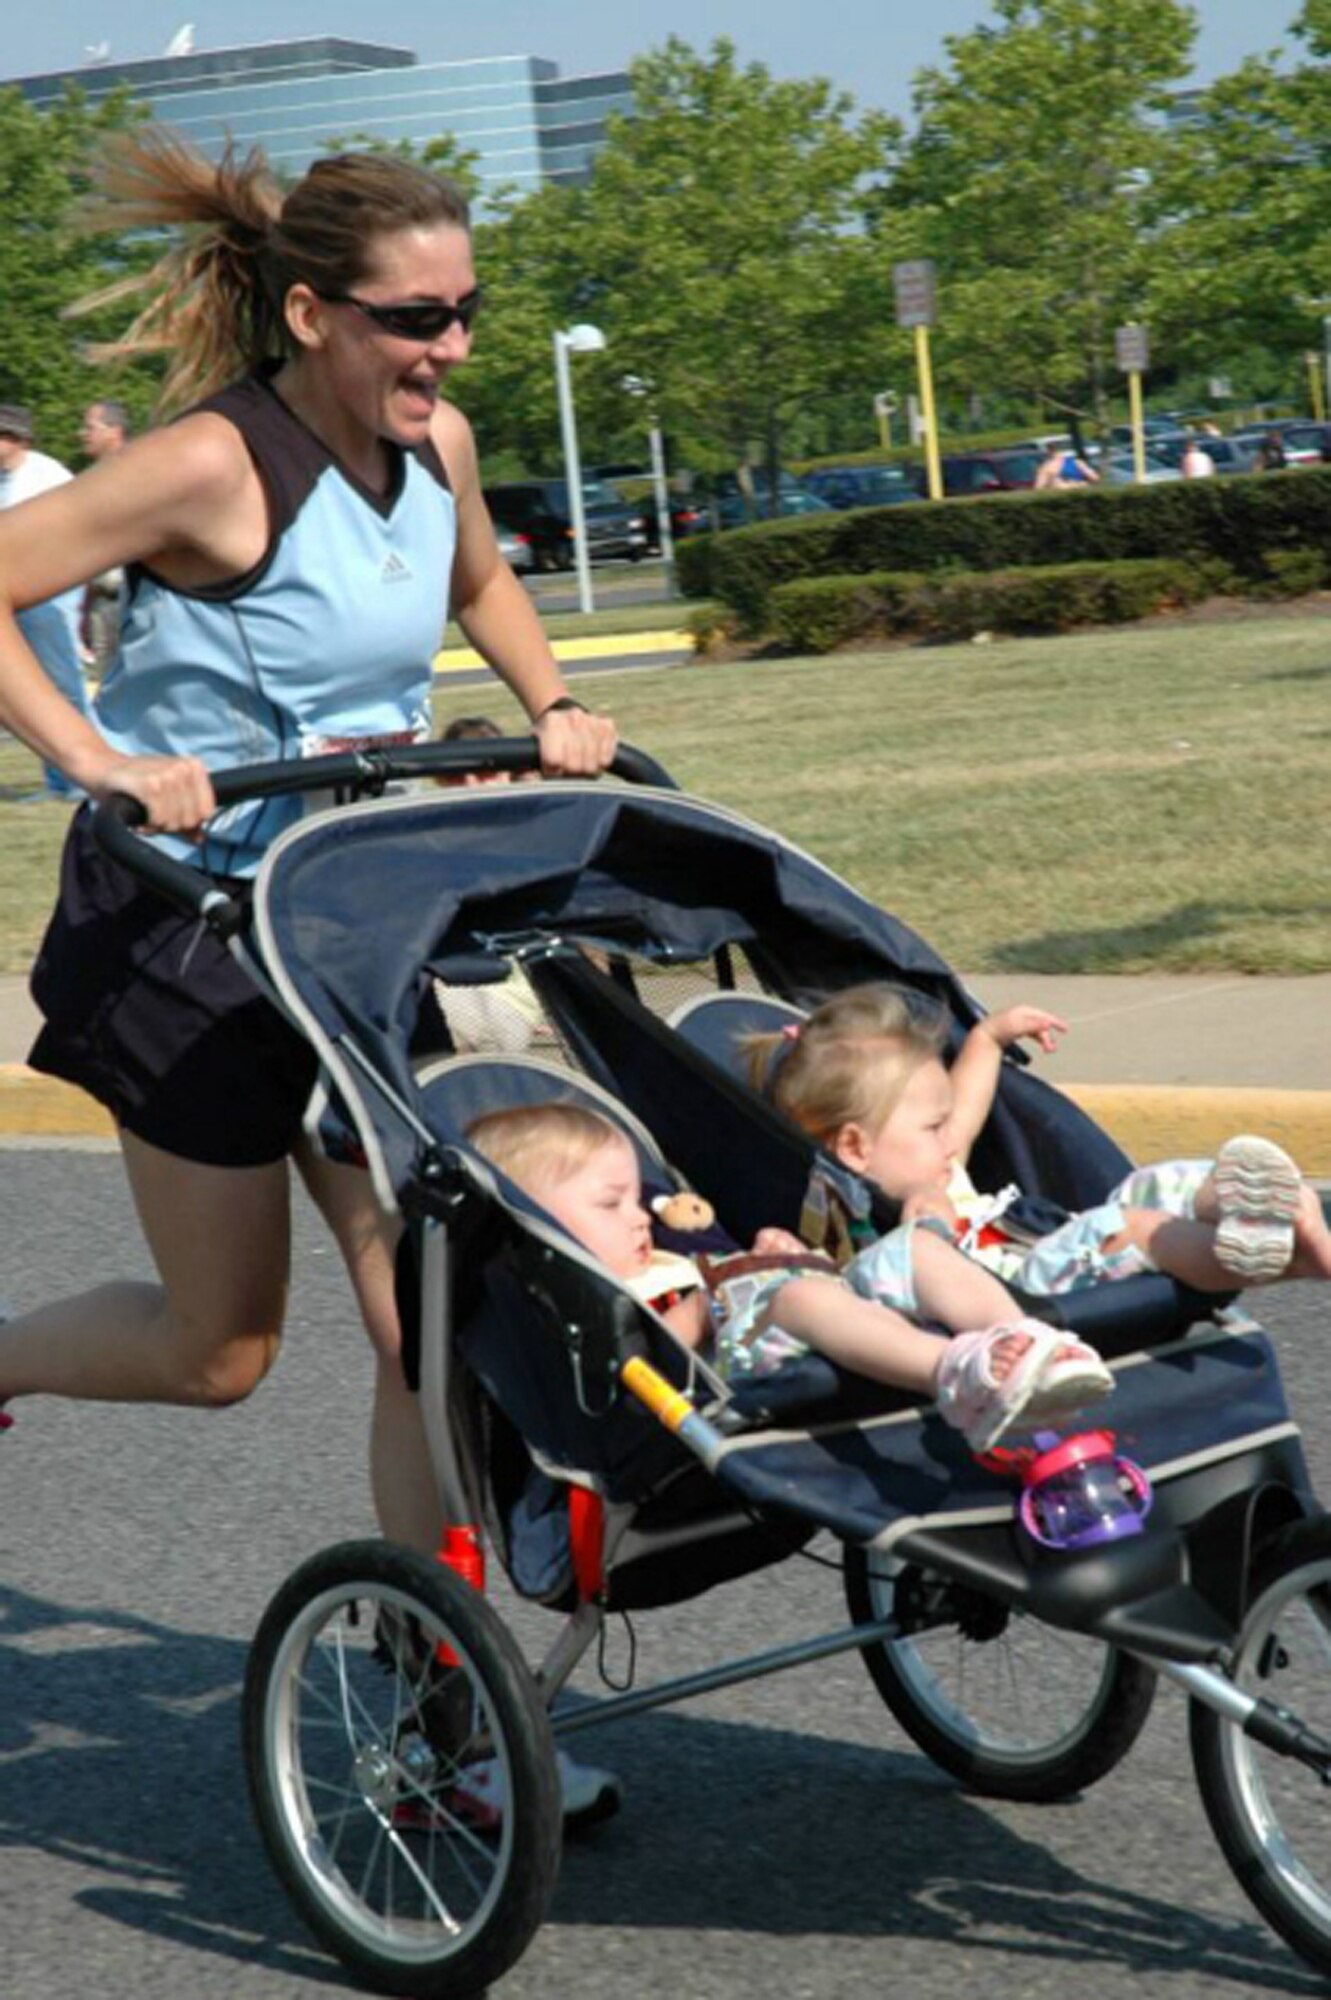 At the summer 2006 Tim Harmon 5K, in Fairfax, Va., Senior Master Sgt. Jennifer Burg teamed up with her twin daughters, Maddy and Kaylee, to win the Baby Jogger Division. "As a single active duty mother of twins, training is quite a challenge," she says. "I find unique ways to incorporate them into the training I do during 'girl' time.  They hop in the jogger, cover up with blankets, and find ways to entertain themselves." (Photo courtesy of Senior Master Sgt. Jennifer Burg.)